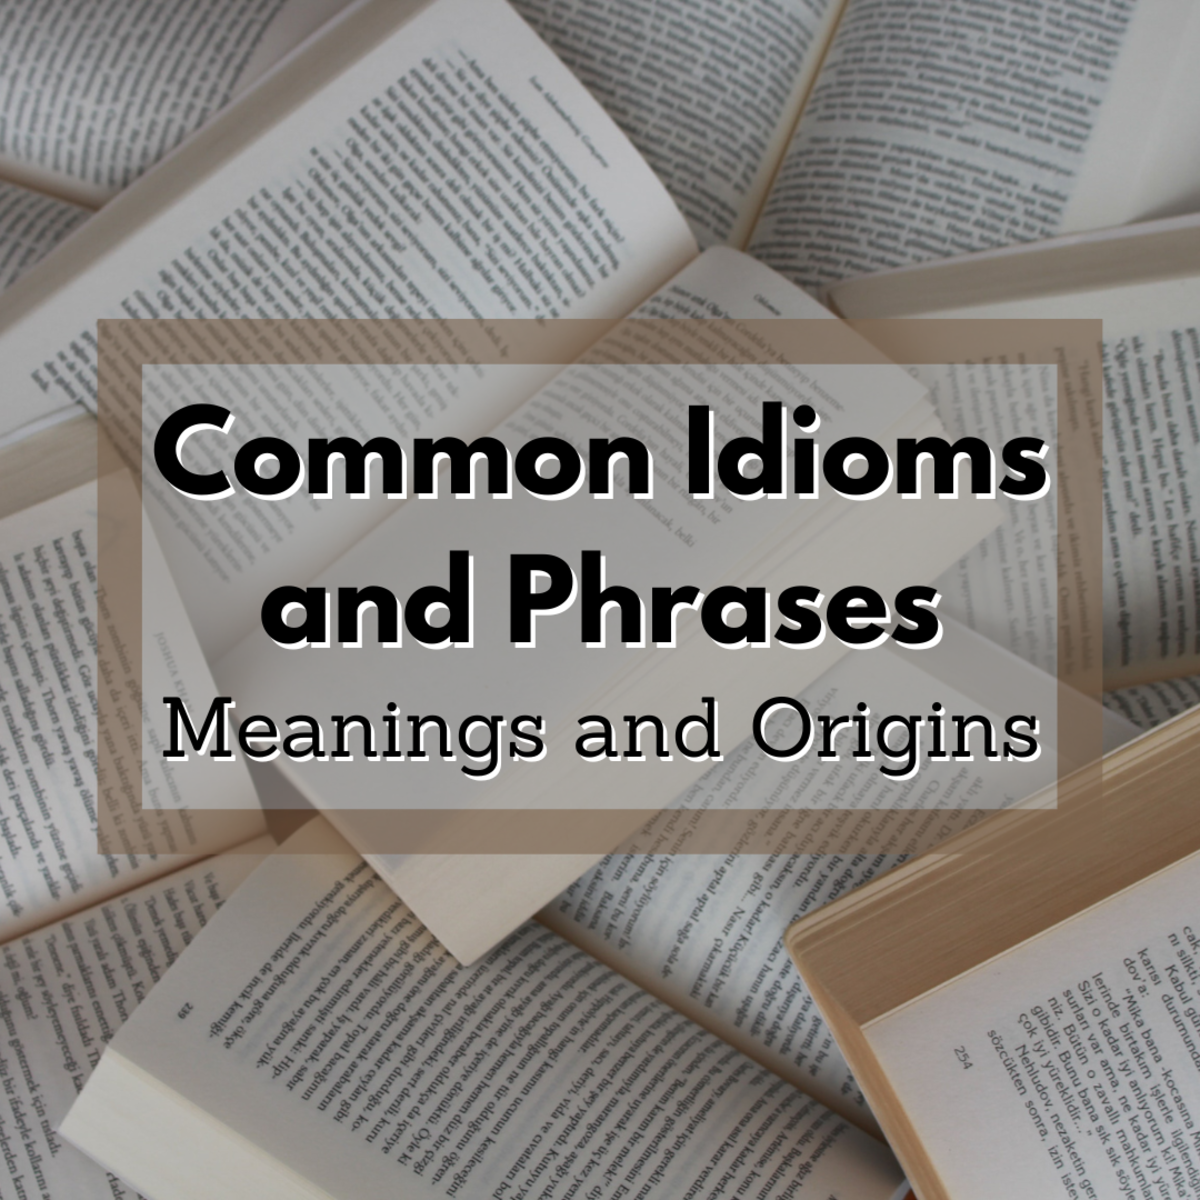 Common Idioms and Phrases: Meanings and Origins